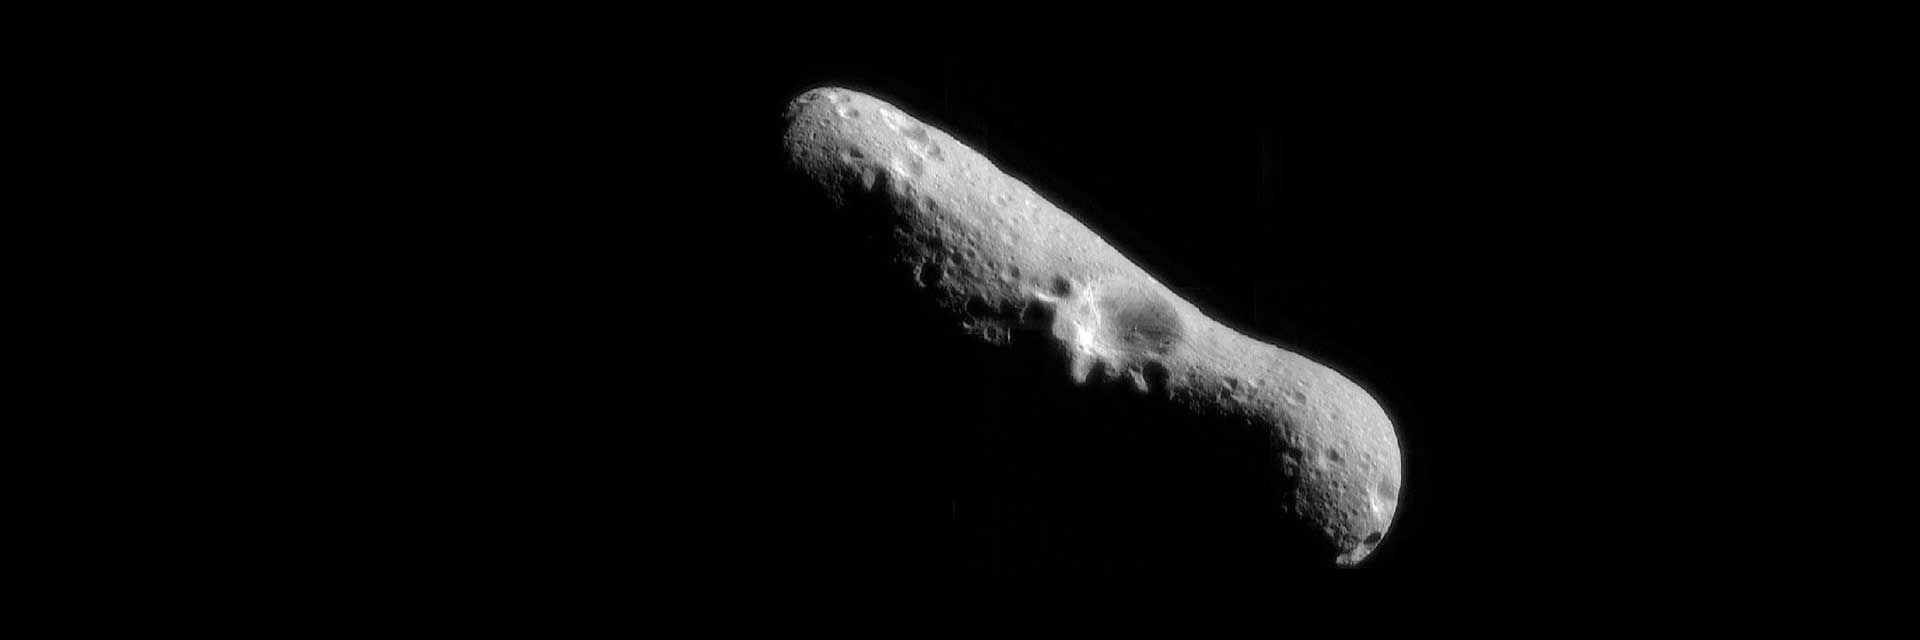 An oblong-shaped asteroid in space with a giant crater near its center